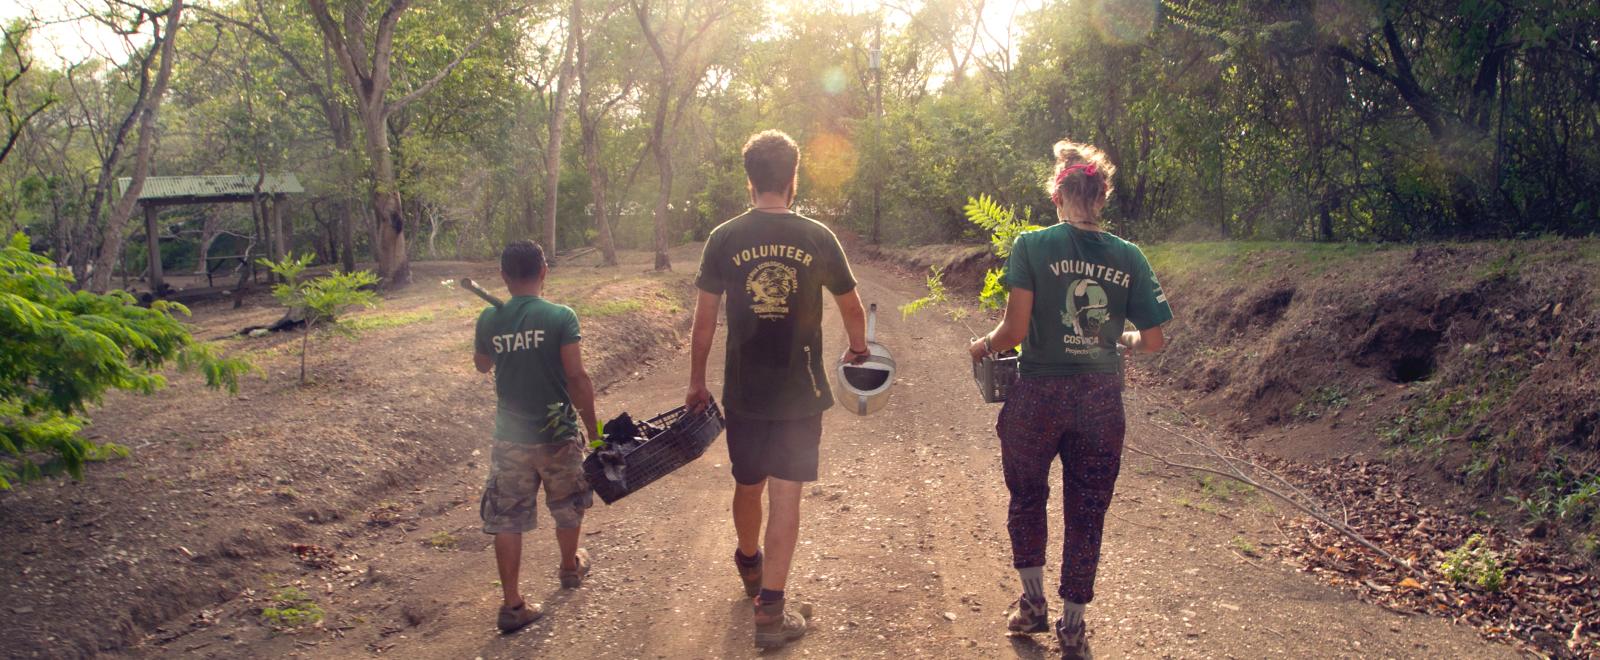 Projects Abroad staff and volunteers carry trees after planting saplings in Costa Rica